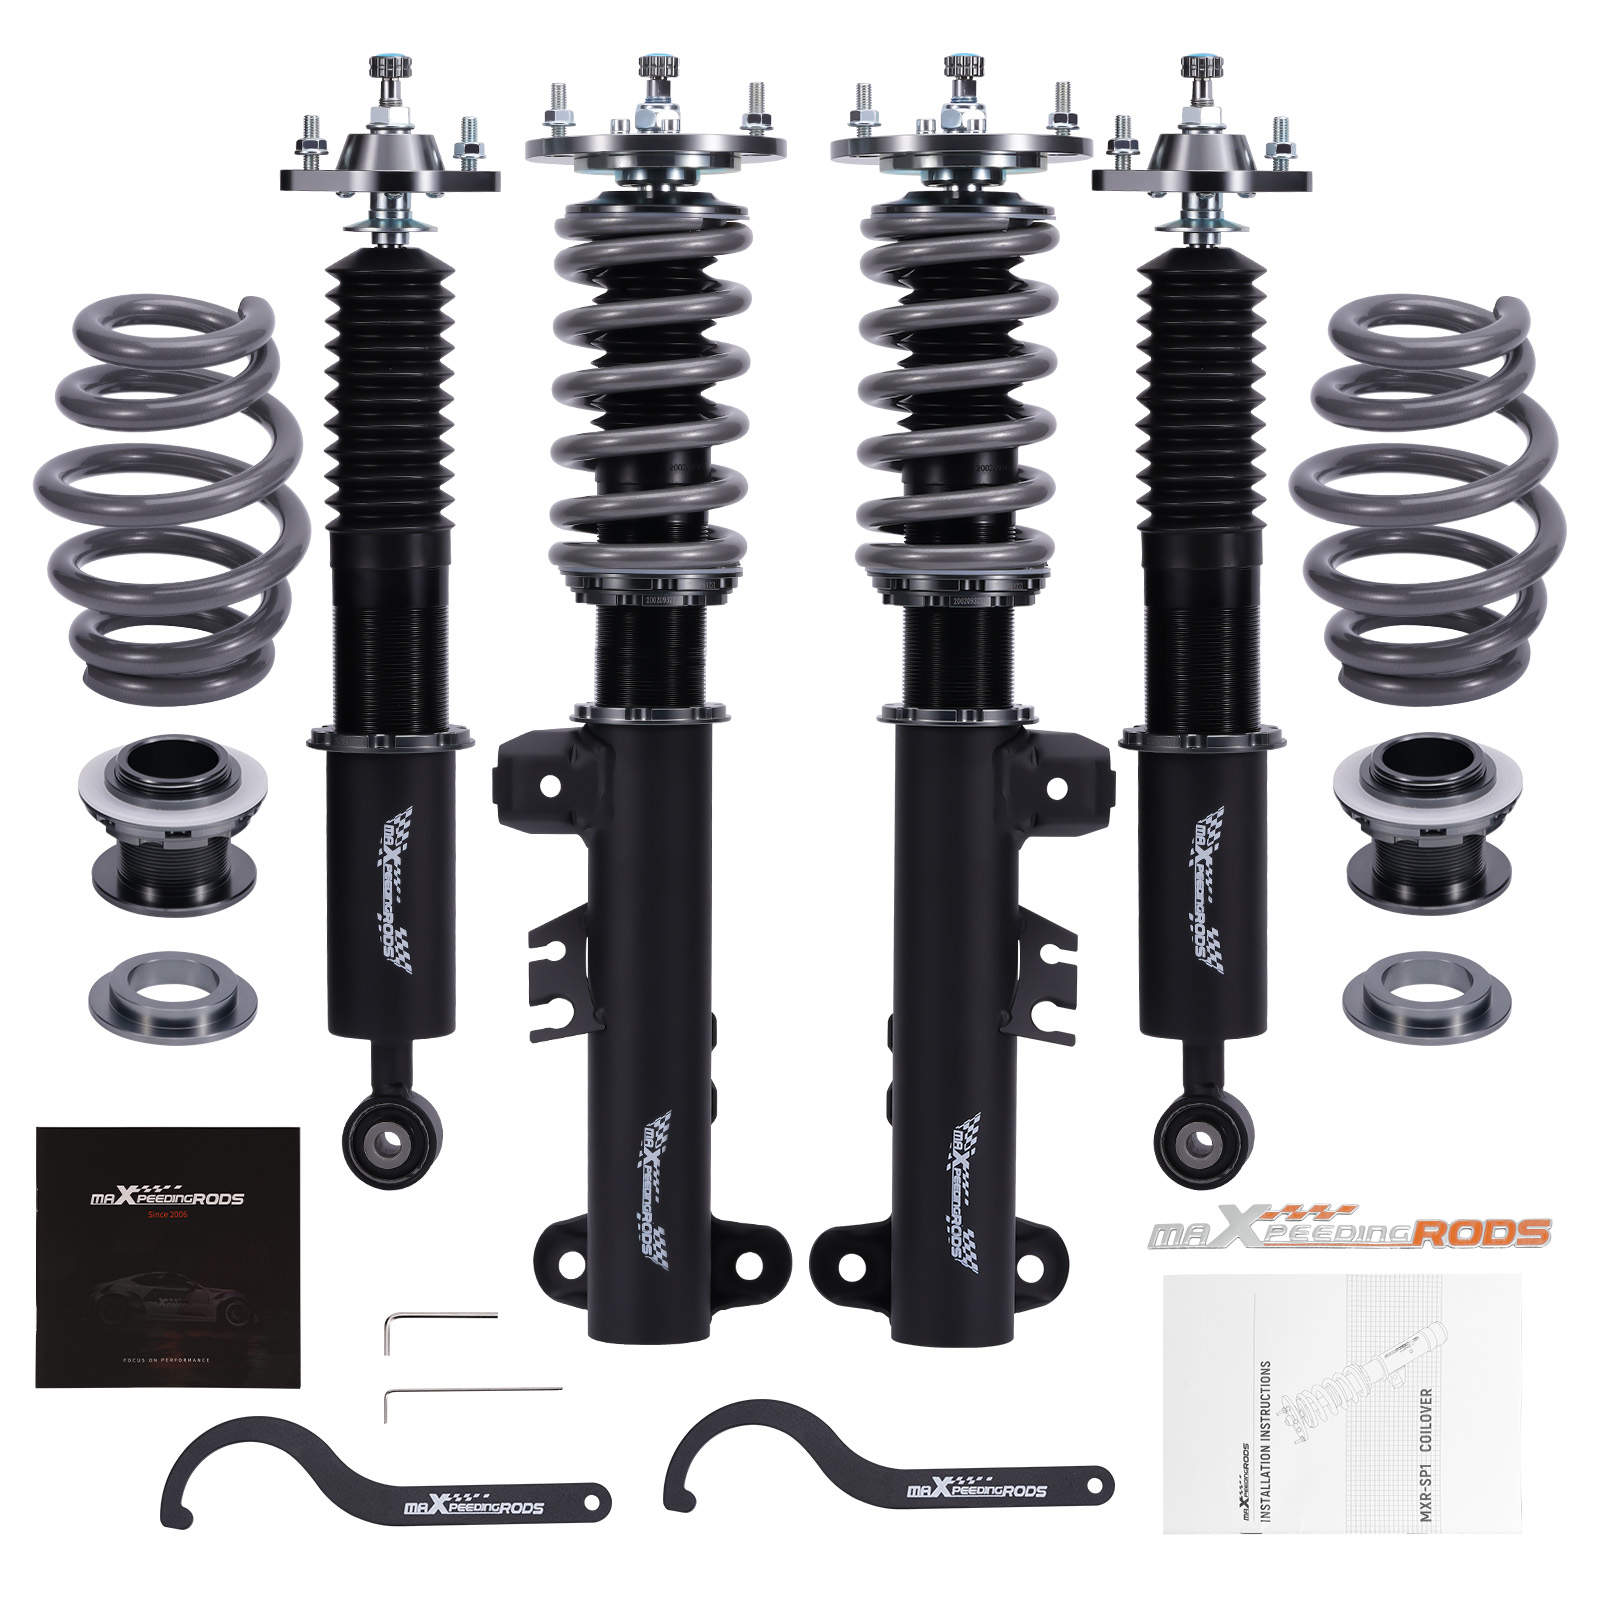 Maxpeedingrods T7 24-Level Rebound Damping Adj. Coilovers Kit Compatible for BMW 3 Series E36